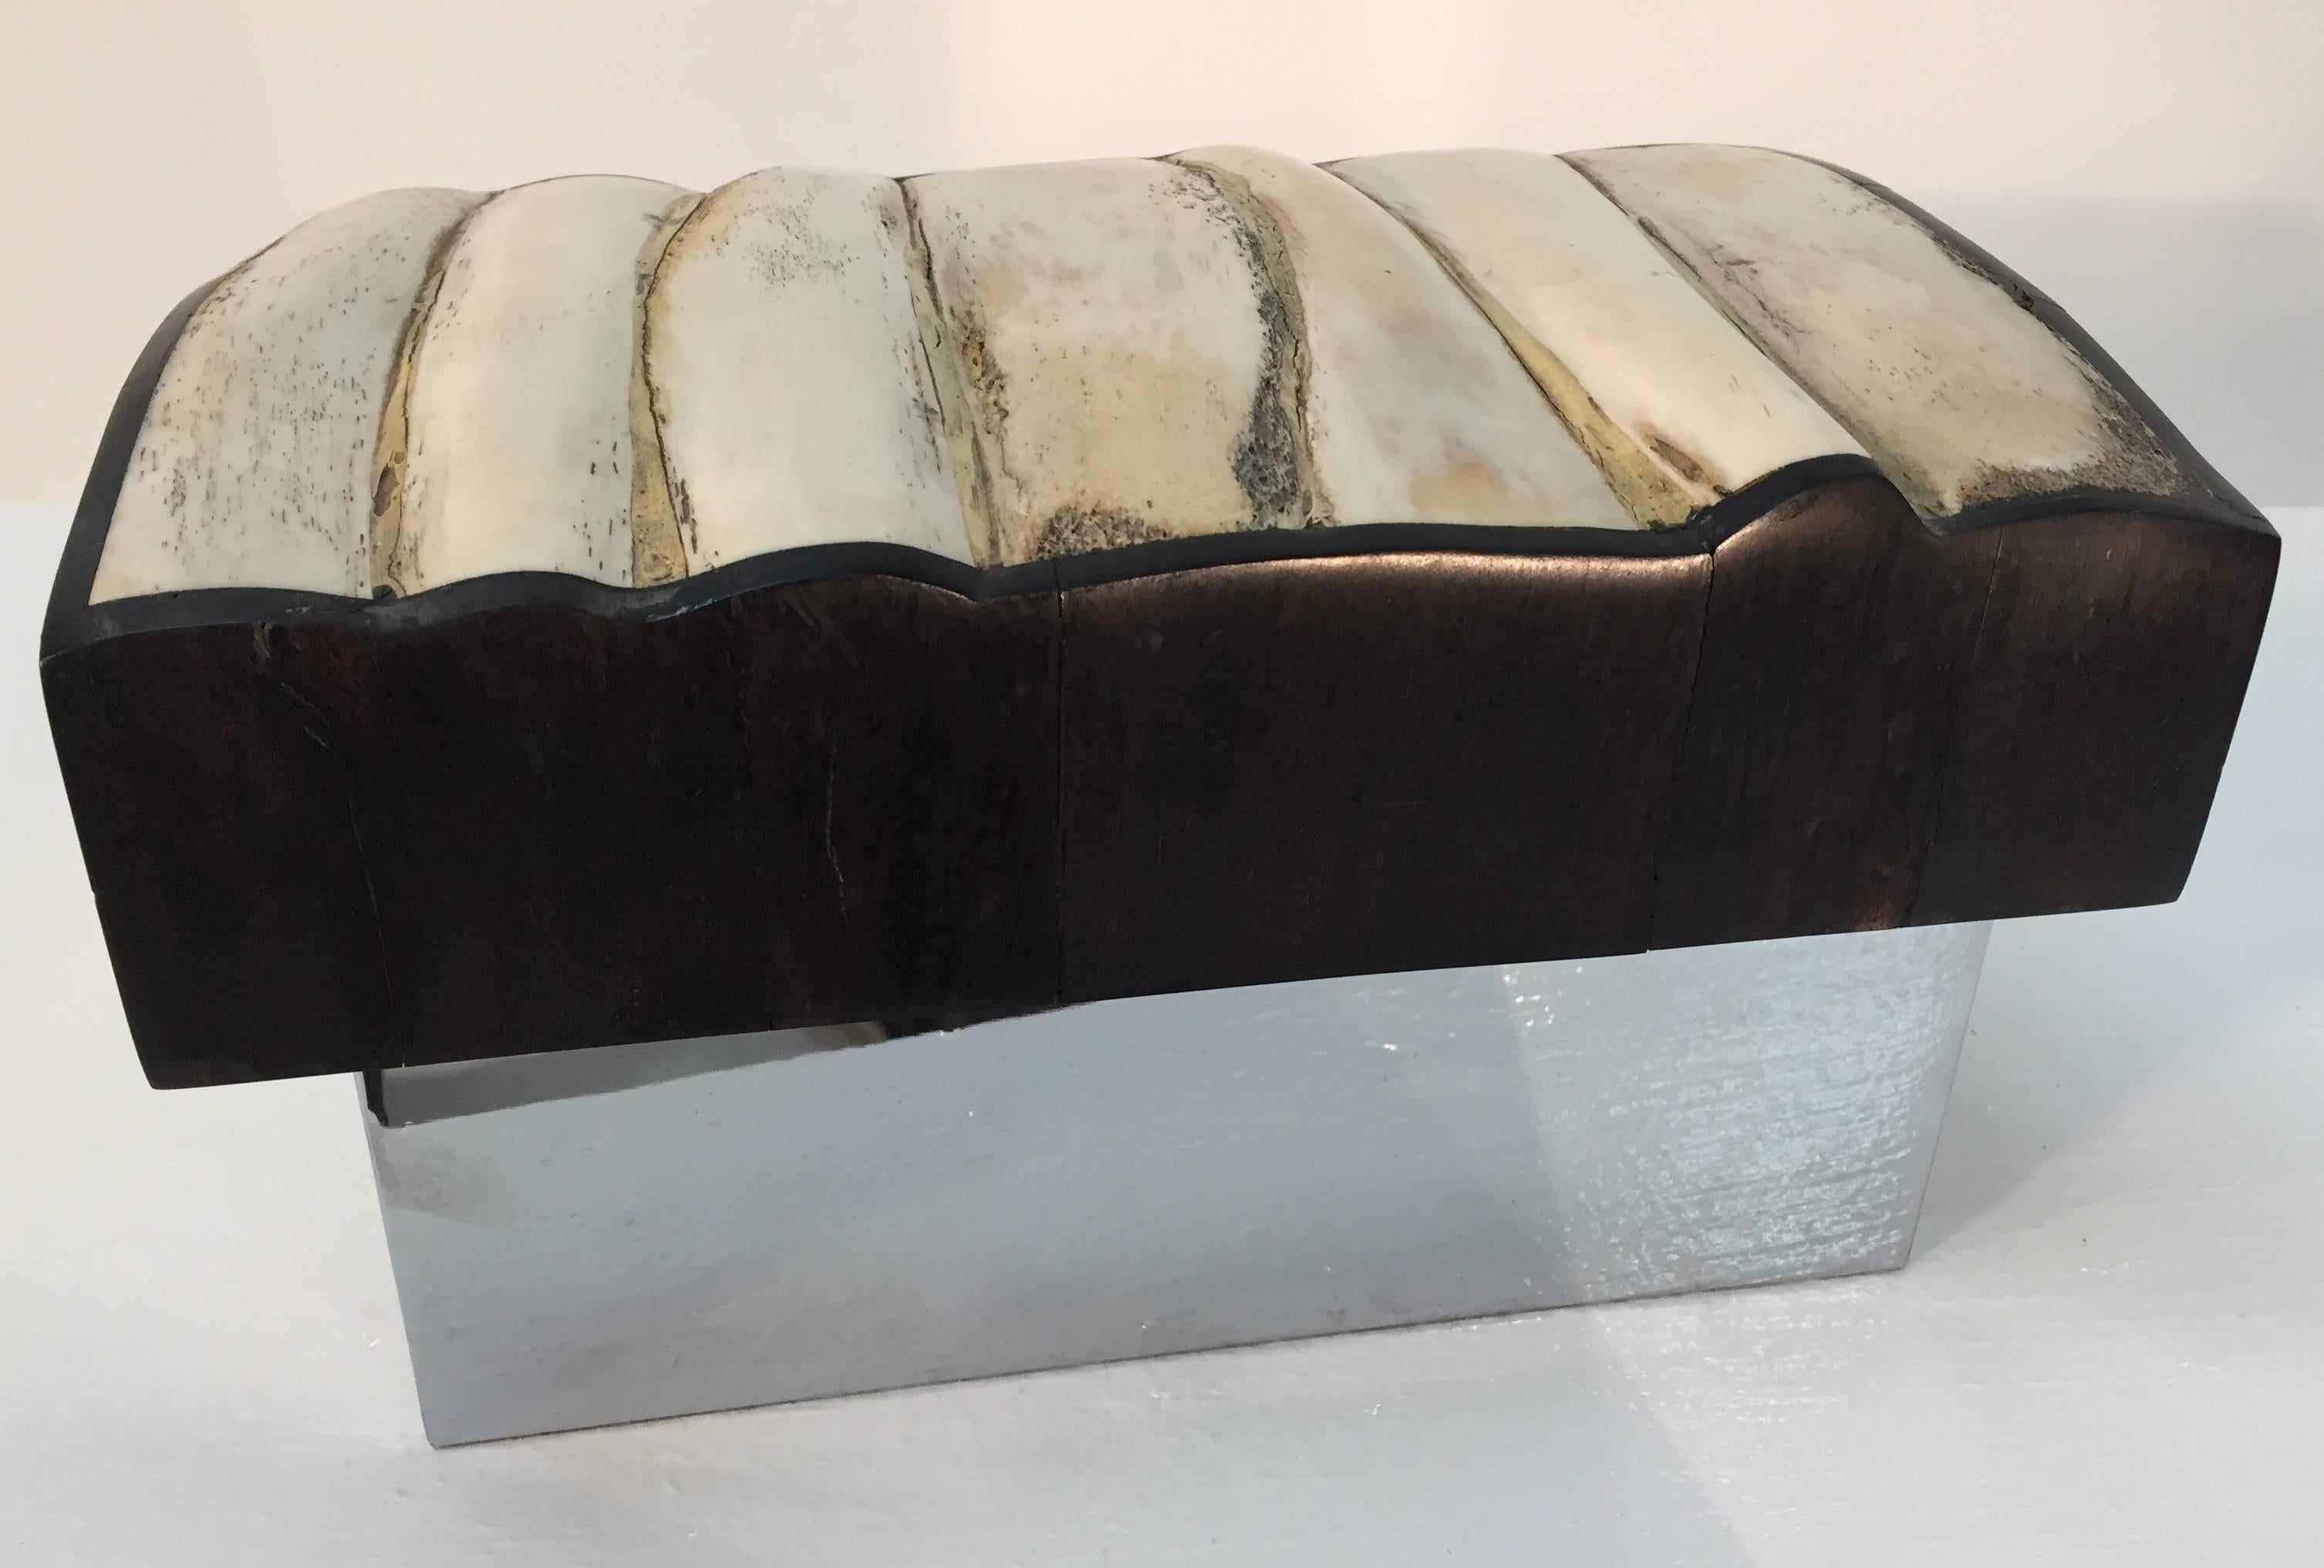 Gene Jonson & Robert Marcius box made of antler, wood and chromed steel. The interior is lined with suede.